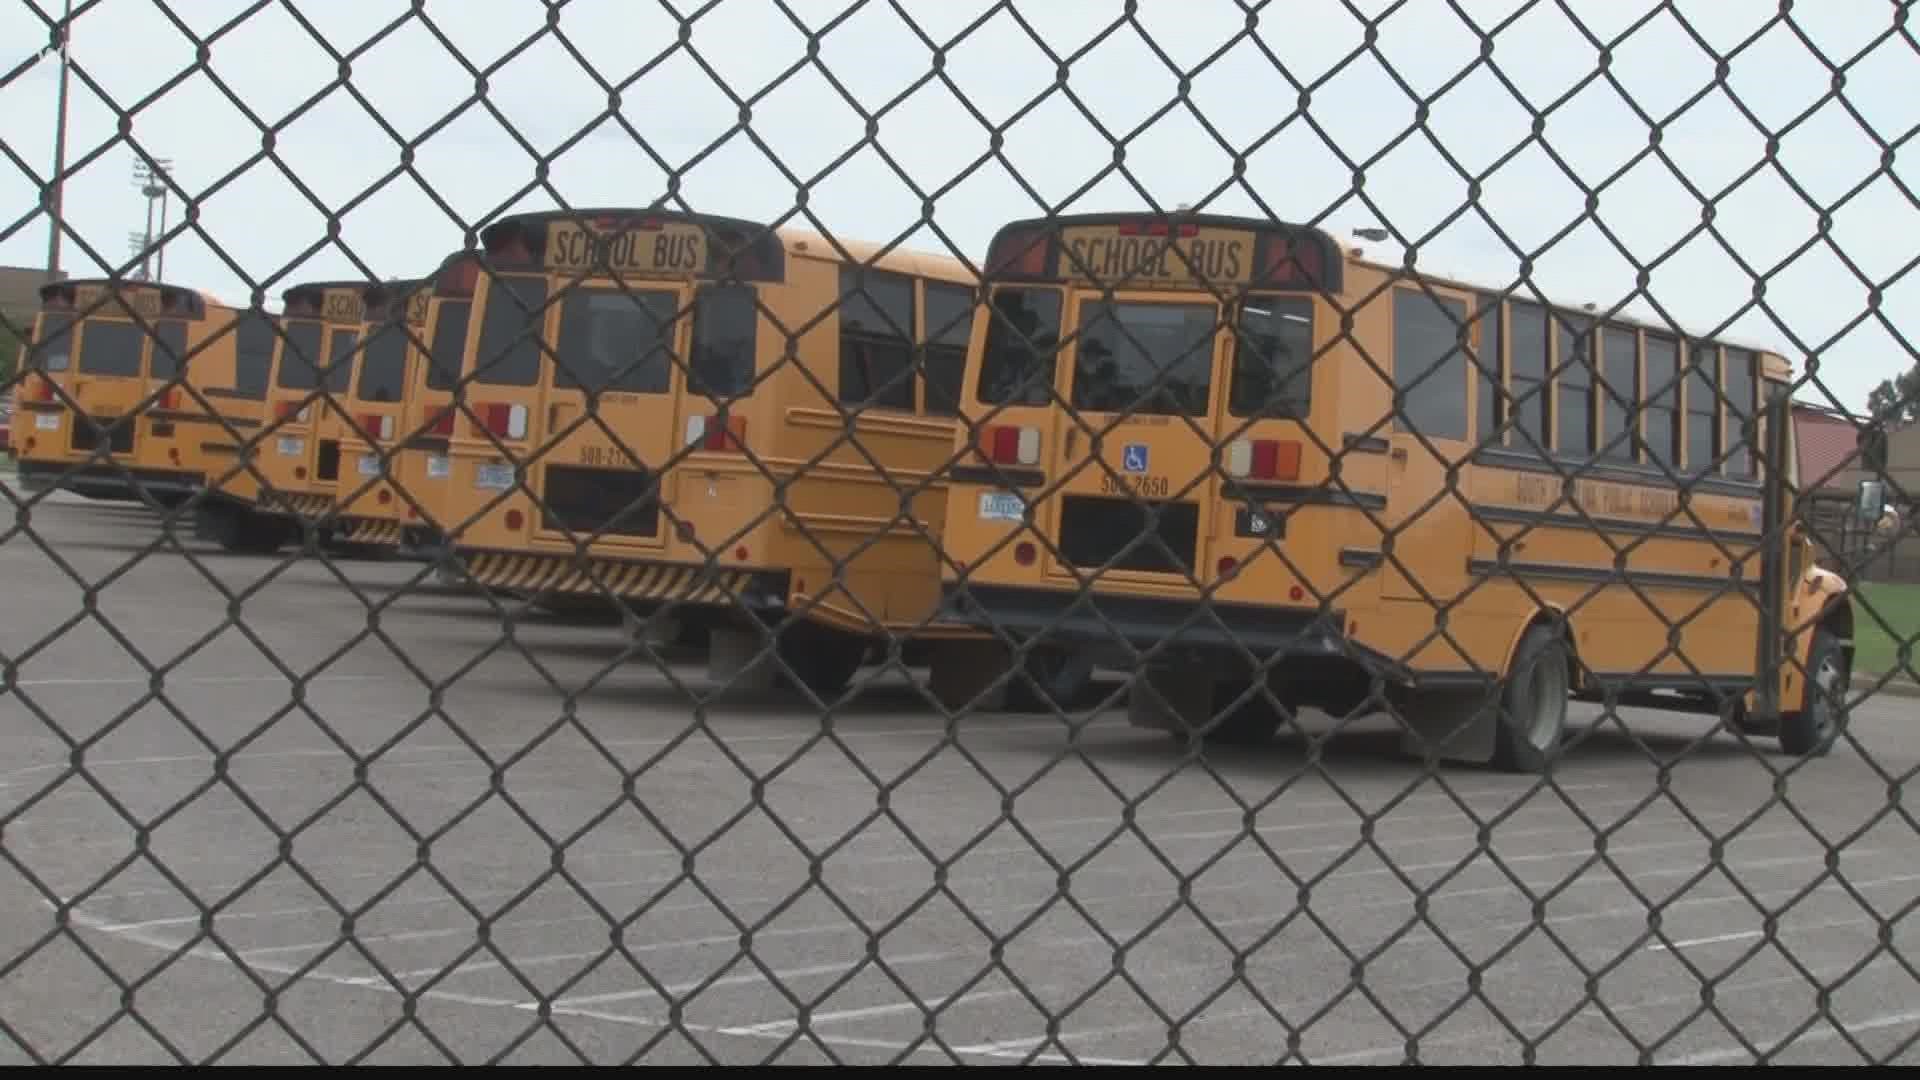 With just a few days until Saluda County schools return for the year, the district is facing a bus driver shortage.